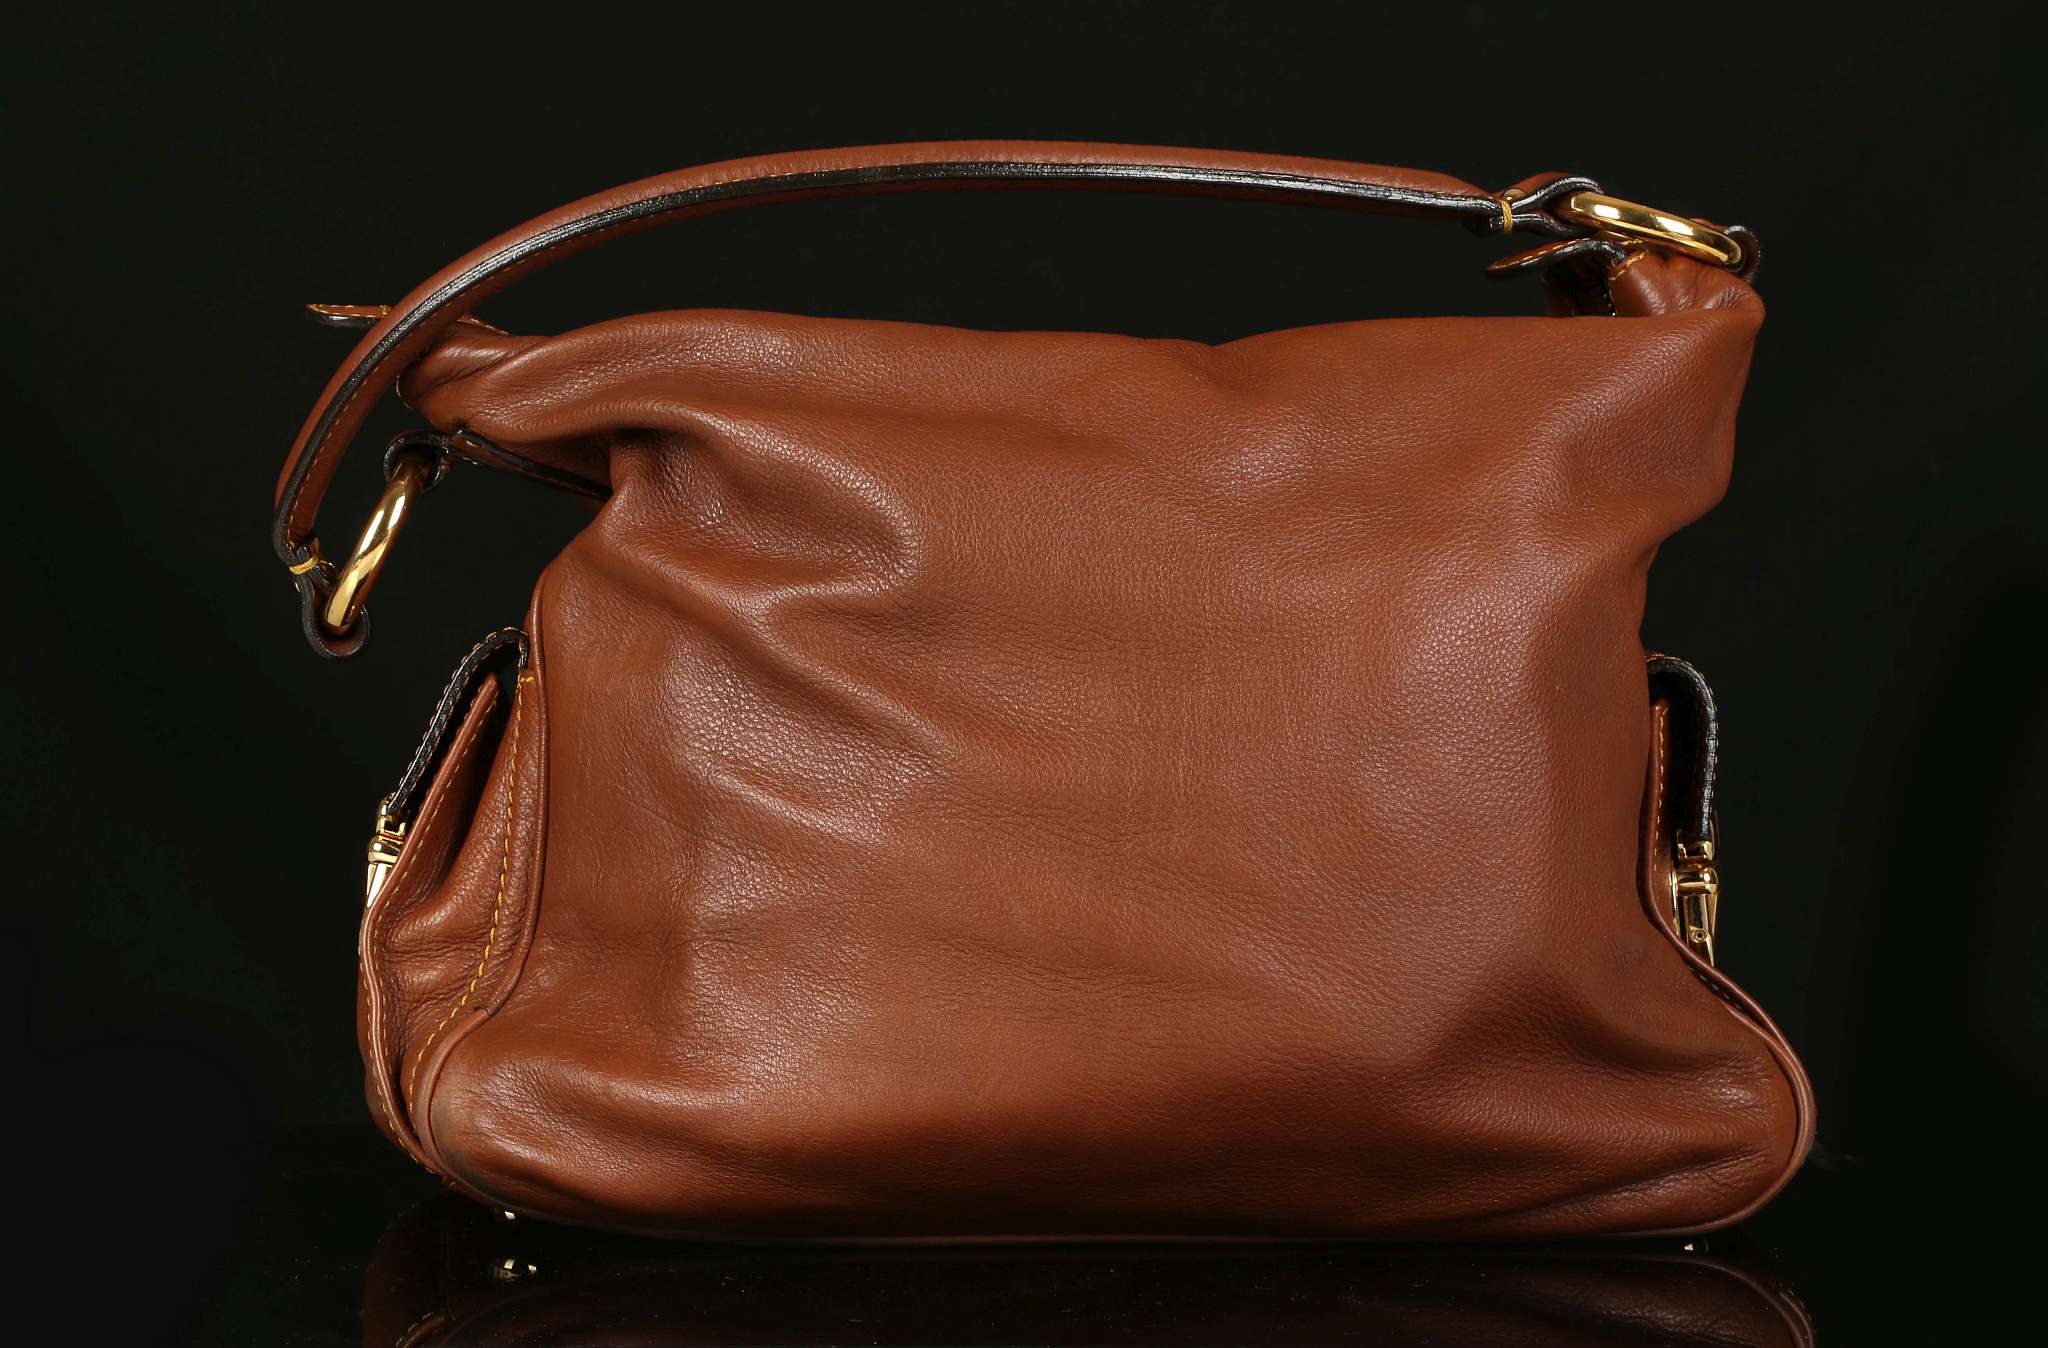 MARC JACOBS BLAKE HOBO BAG, soft brown leather with contrasting stitching, gilt tone hardware, - Image 4 of 6